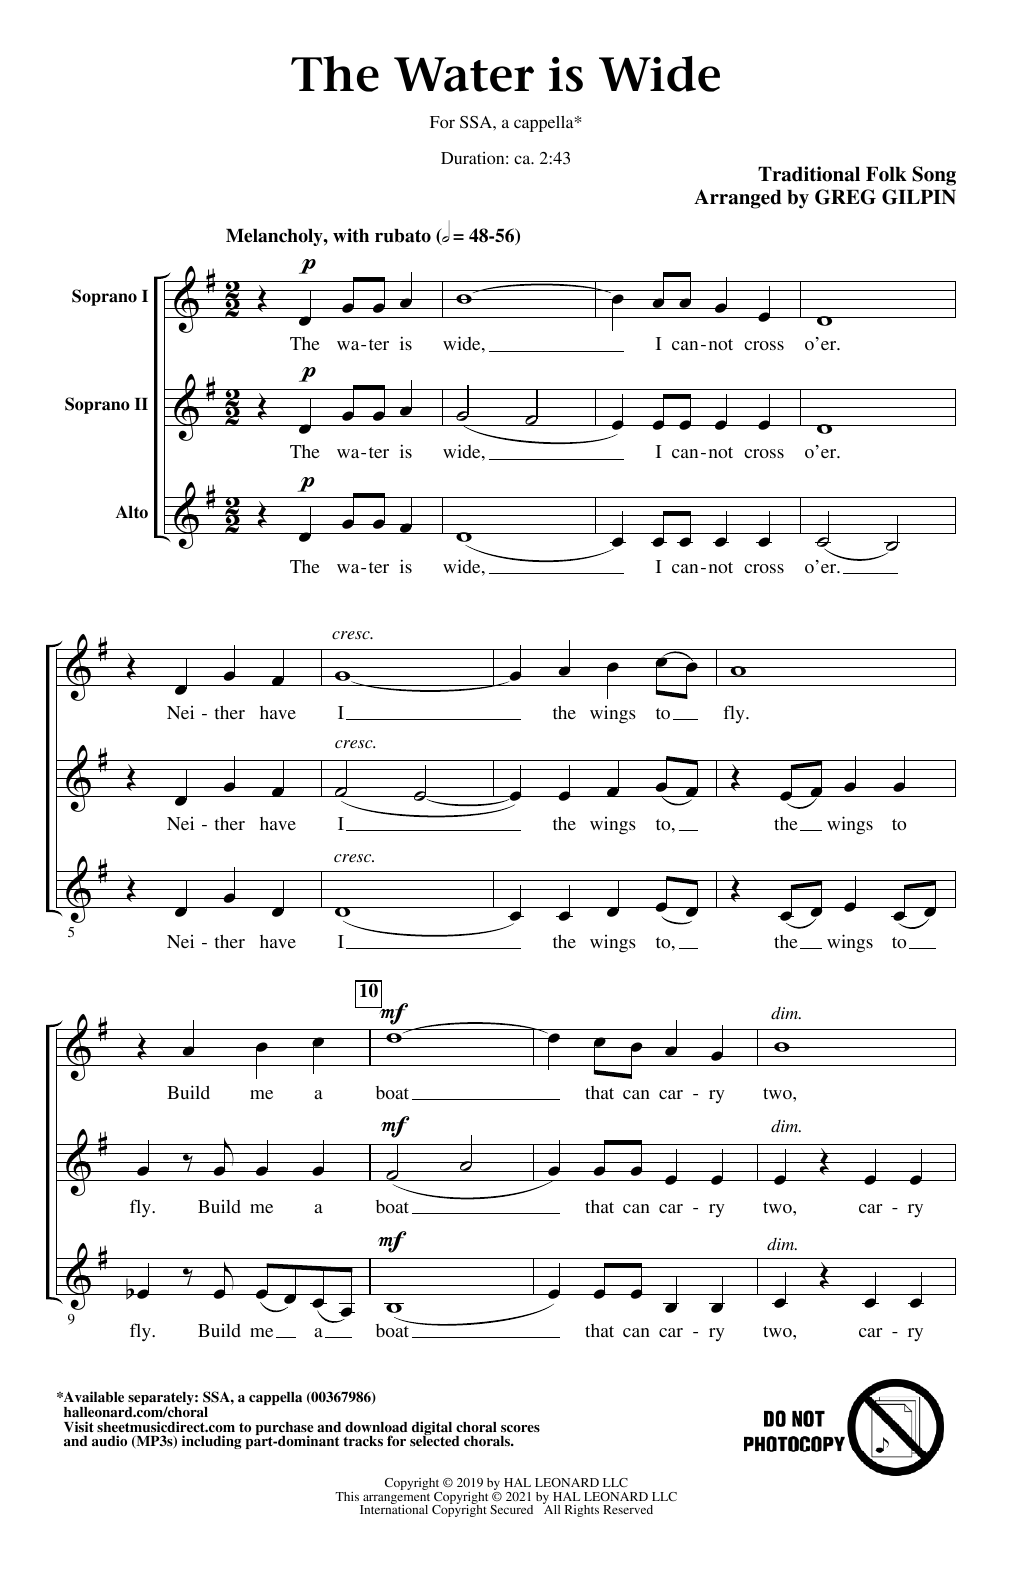 Download Traditional Folk Song The Water Is Wide (arr. Greg Gilpin) Sheet Music